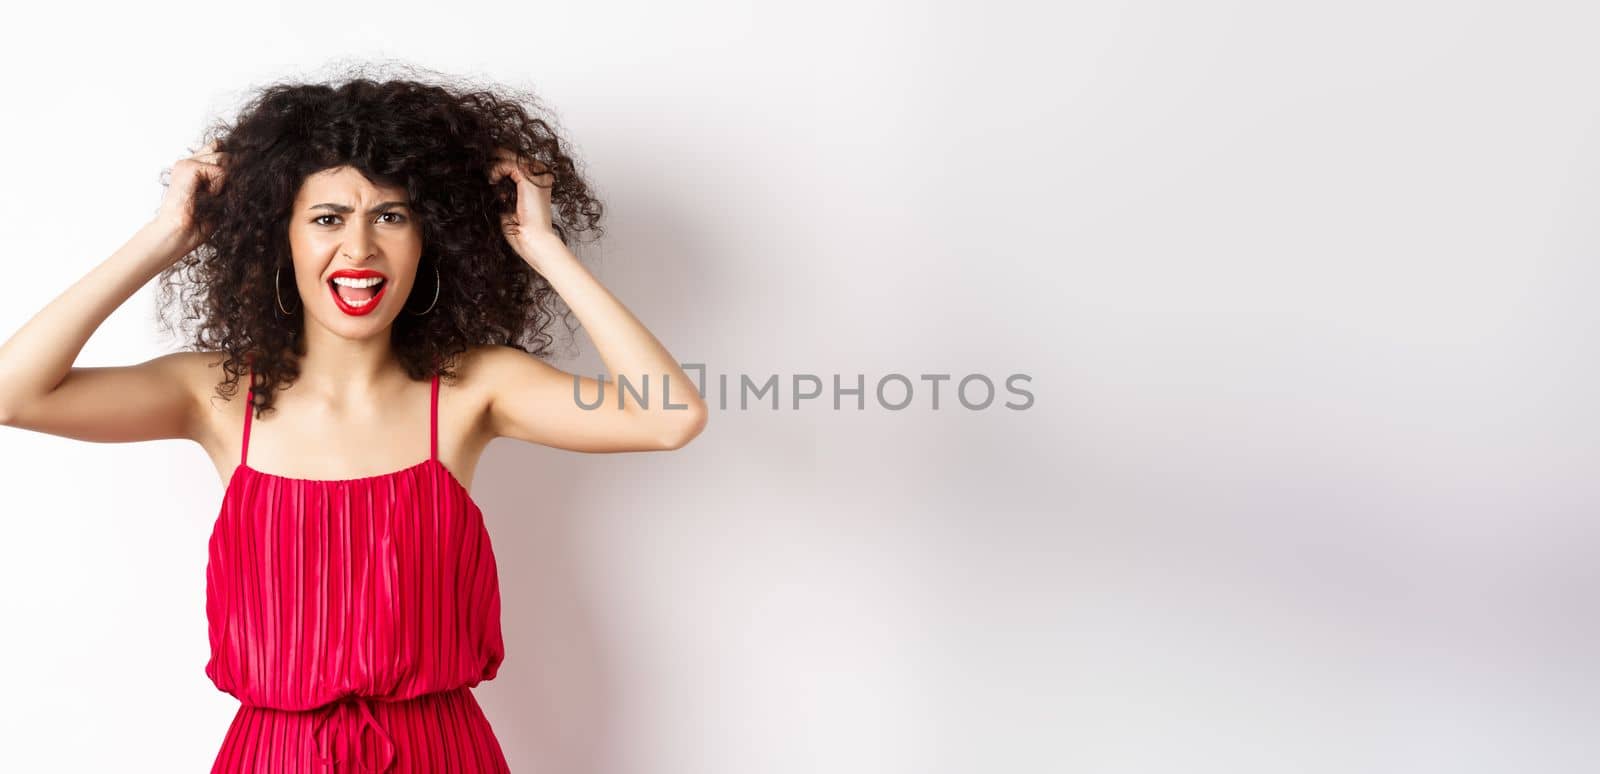 Frustrated curly woman in red dress, frowning and screaming angry, pull out hair and shout at camera, standing on white background.